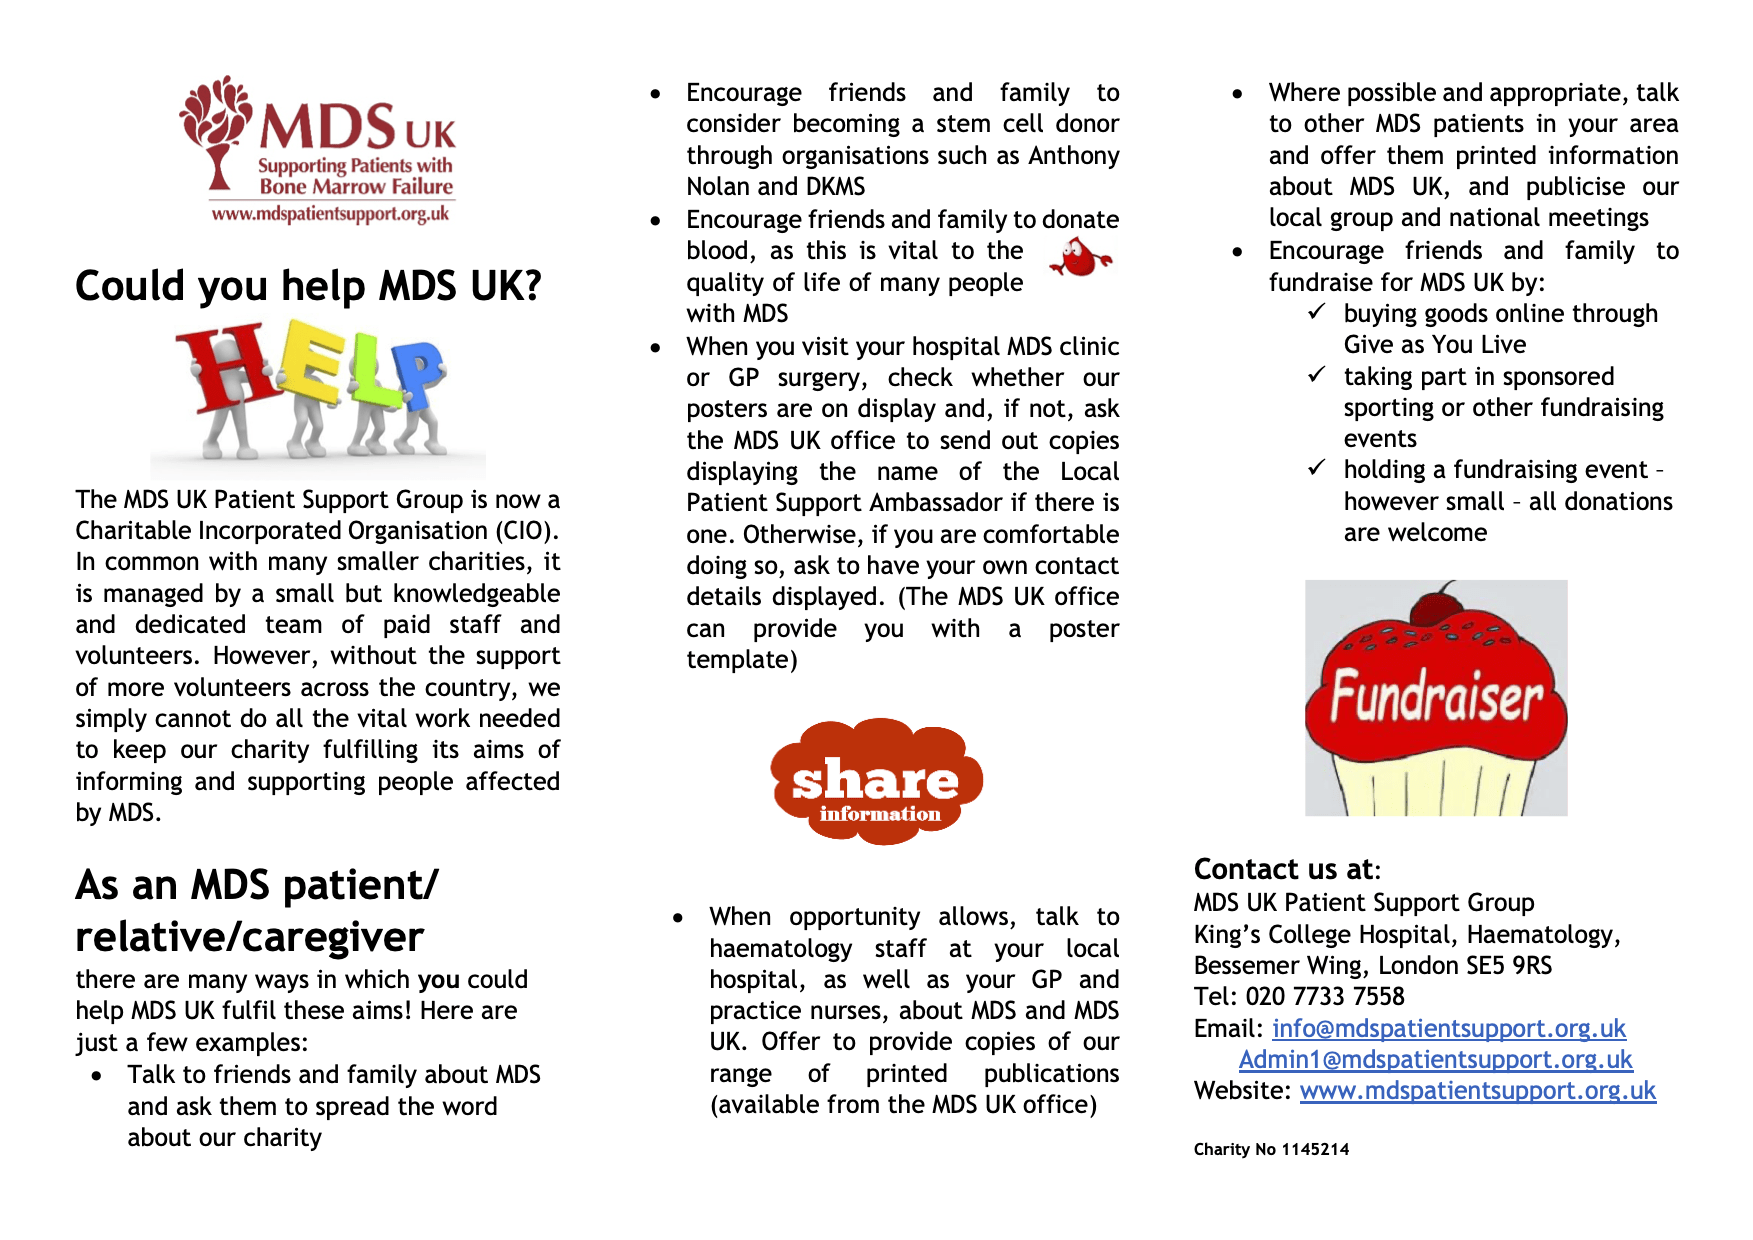 Leaflet about Volunteering opportunities with MDS UK